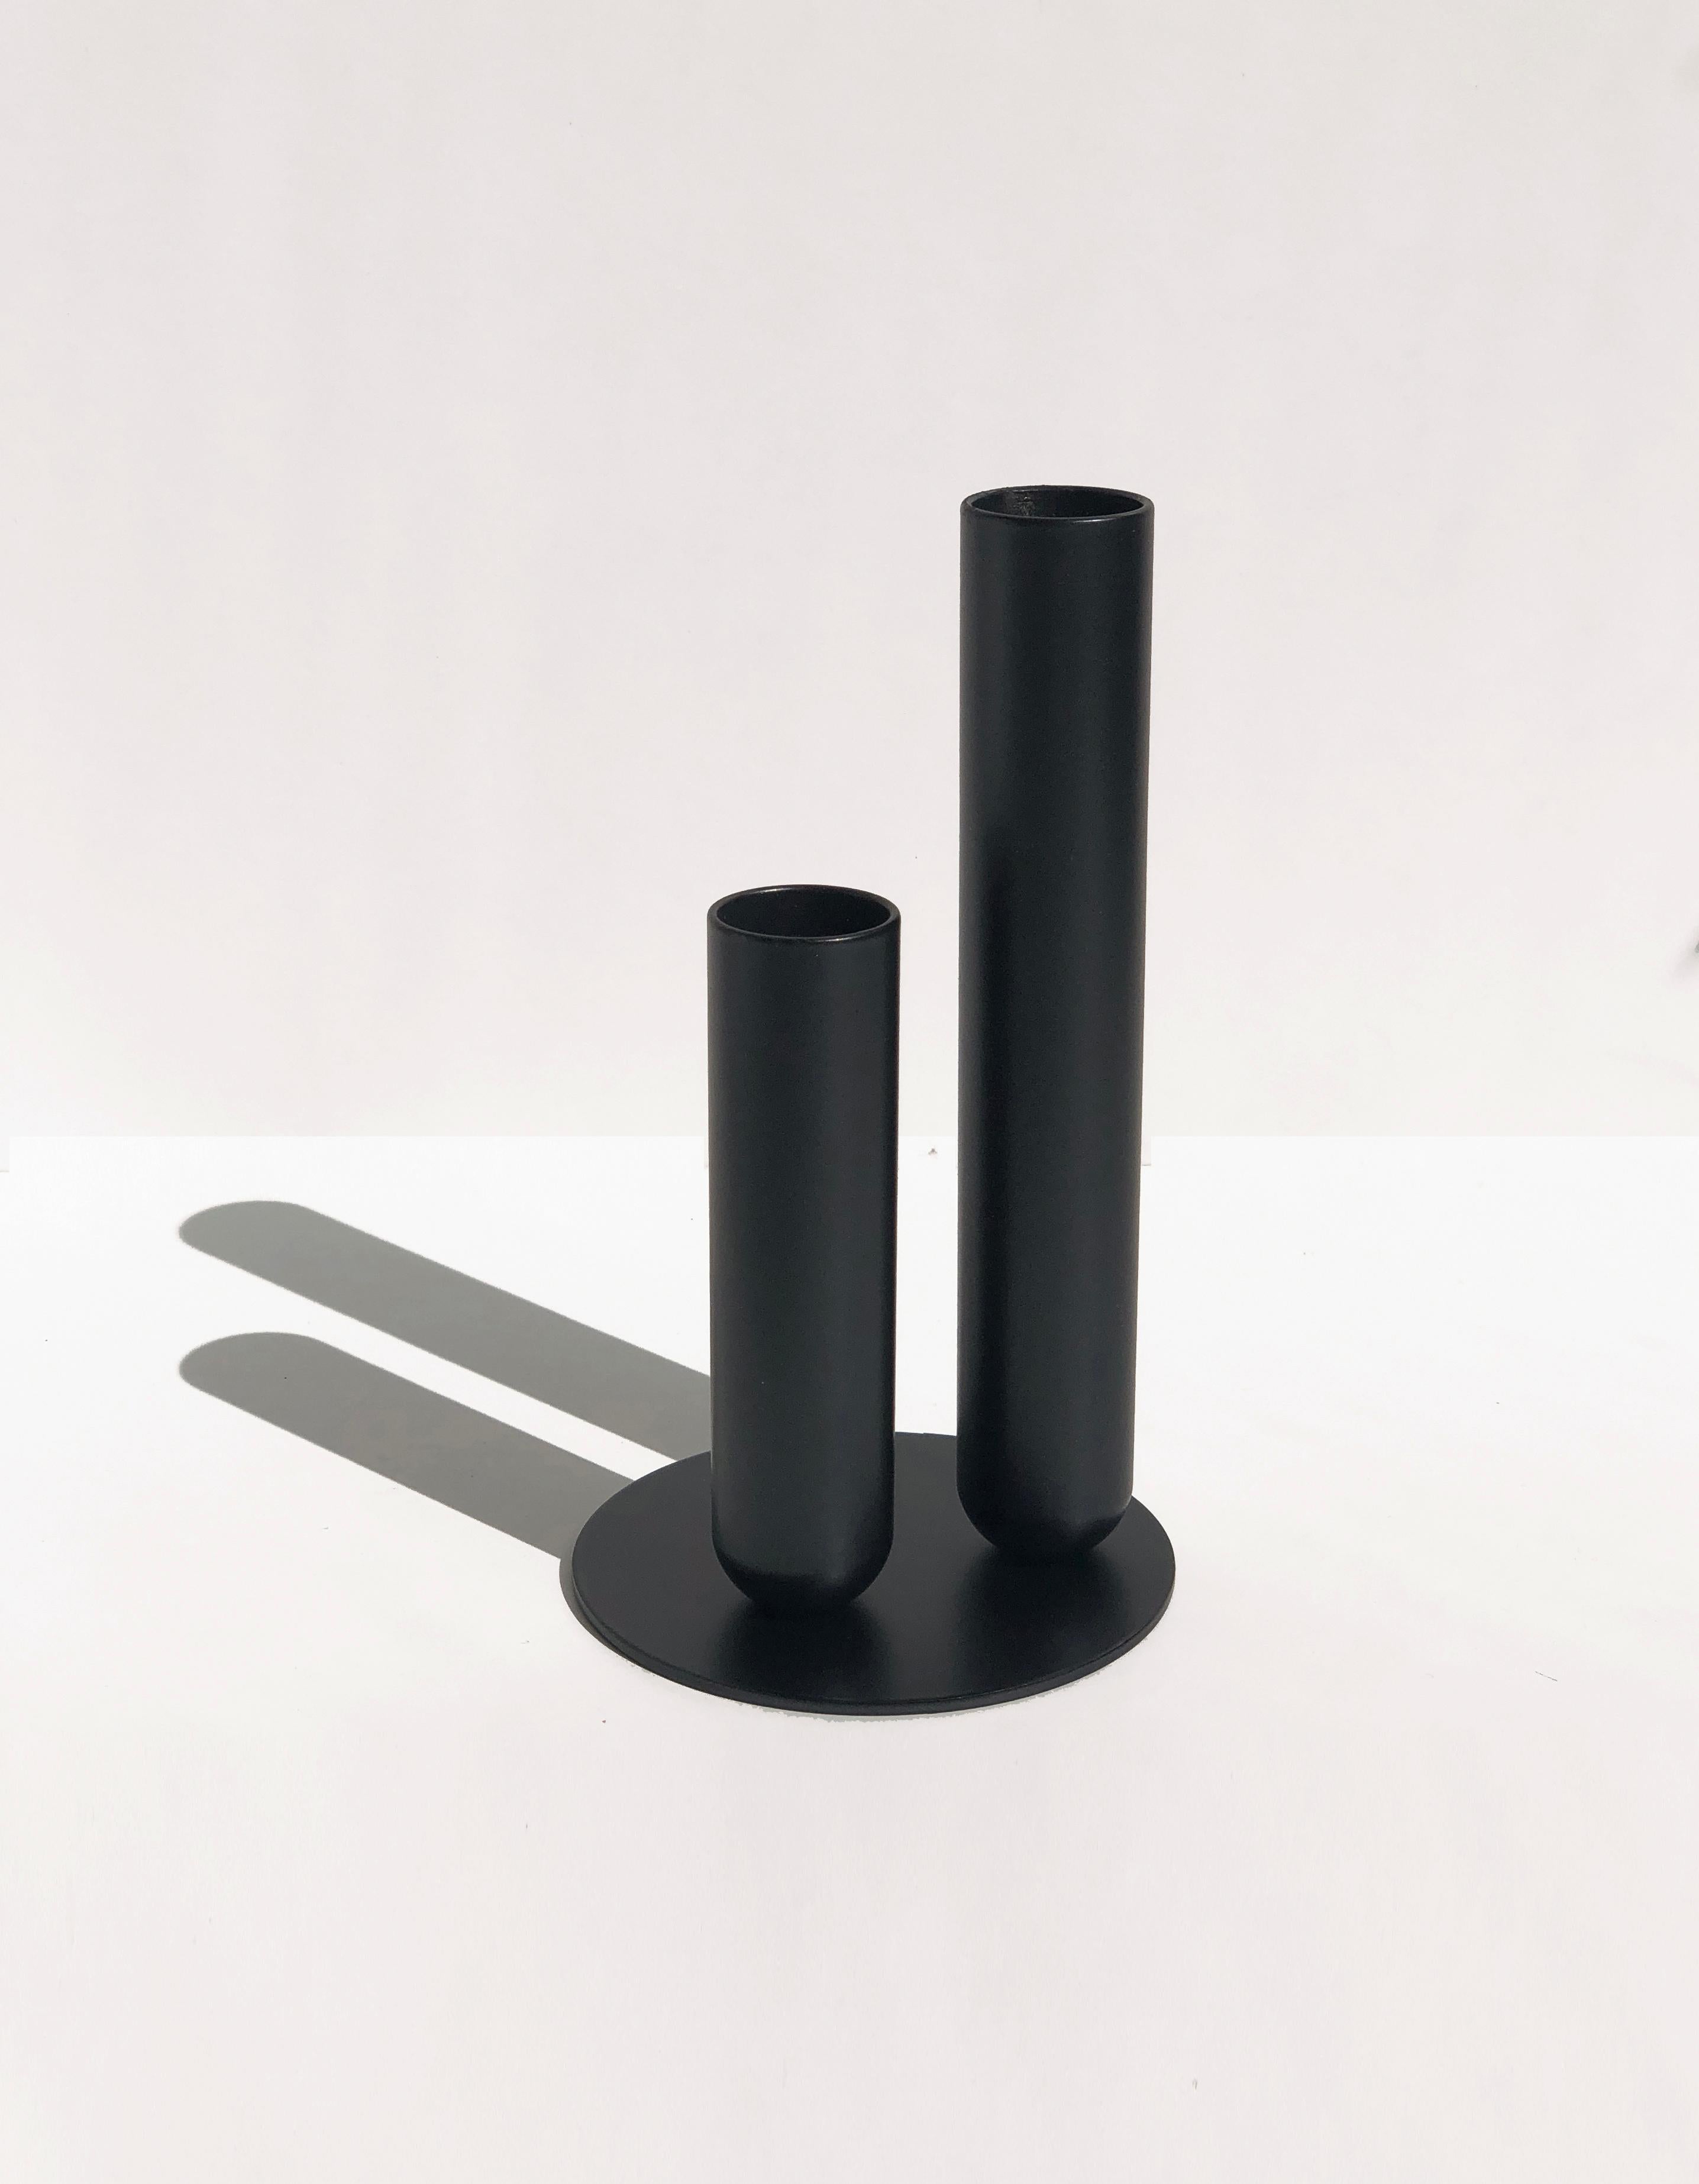 Soliflore Black Vase by Mademoiselle Jo
Dimensions: Ø 8.5 x H 15 cm.
Materials: Turned metal with magnet and EVA foam tray.

Hollow cylinders of 15 cm and 10 cm, diameter 2.5 cm. Plate diameter of 8.5 cm. Metal version with matt white or black